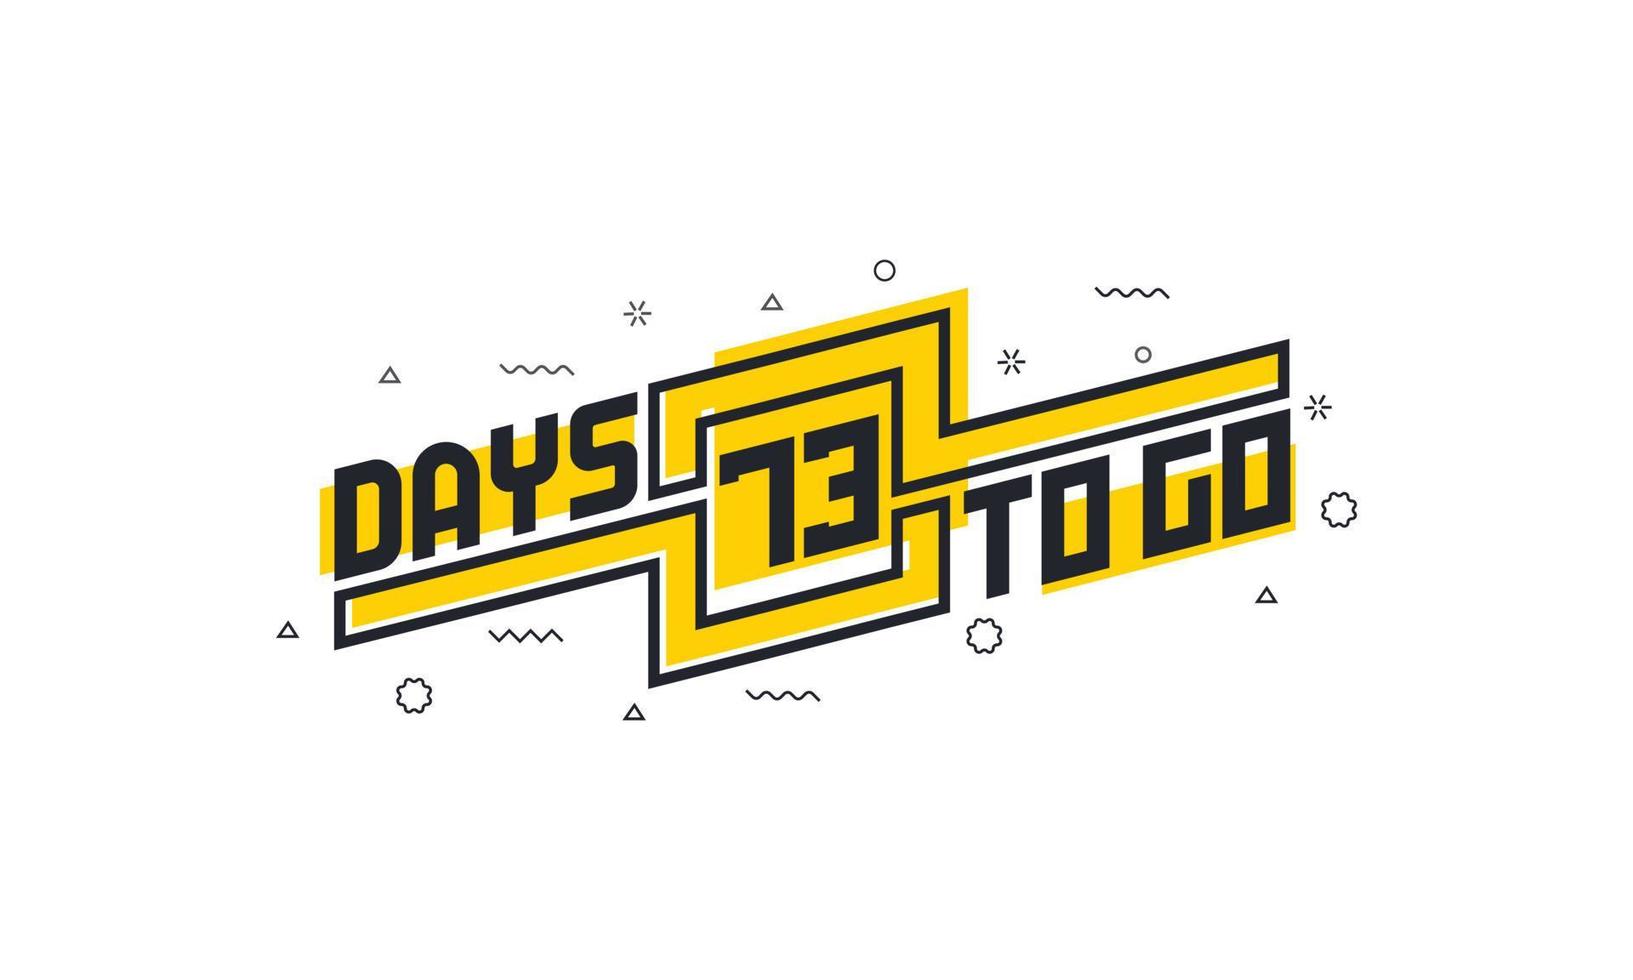 78 days to go countdown sign for sale or promotion. vector